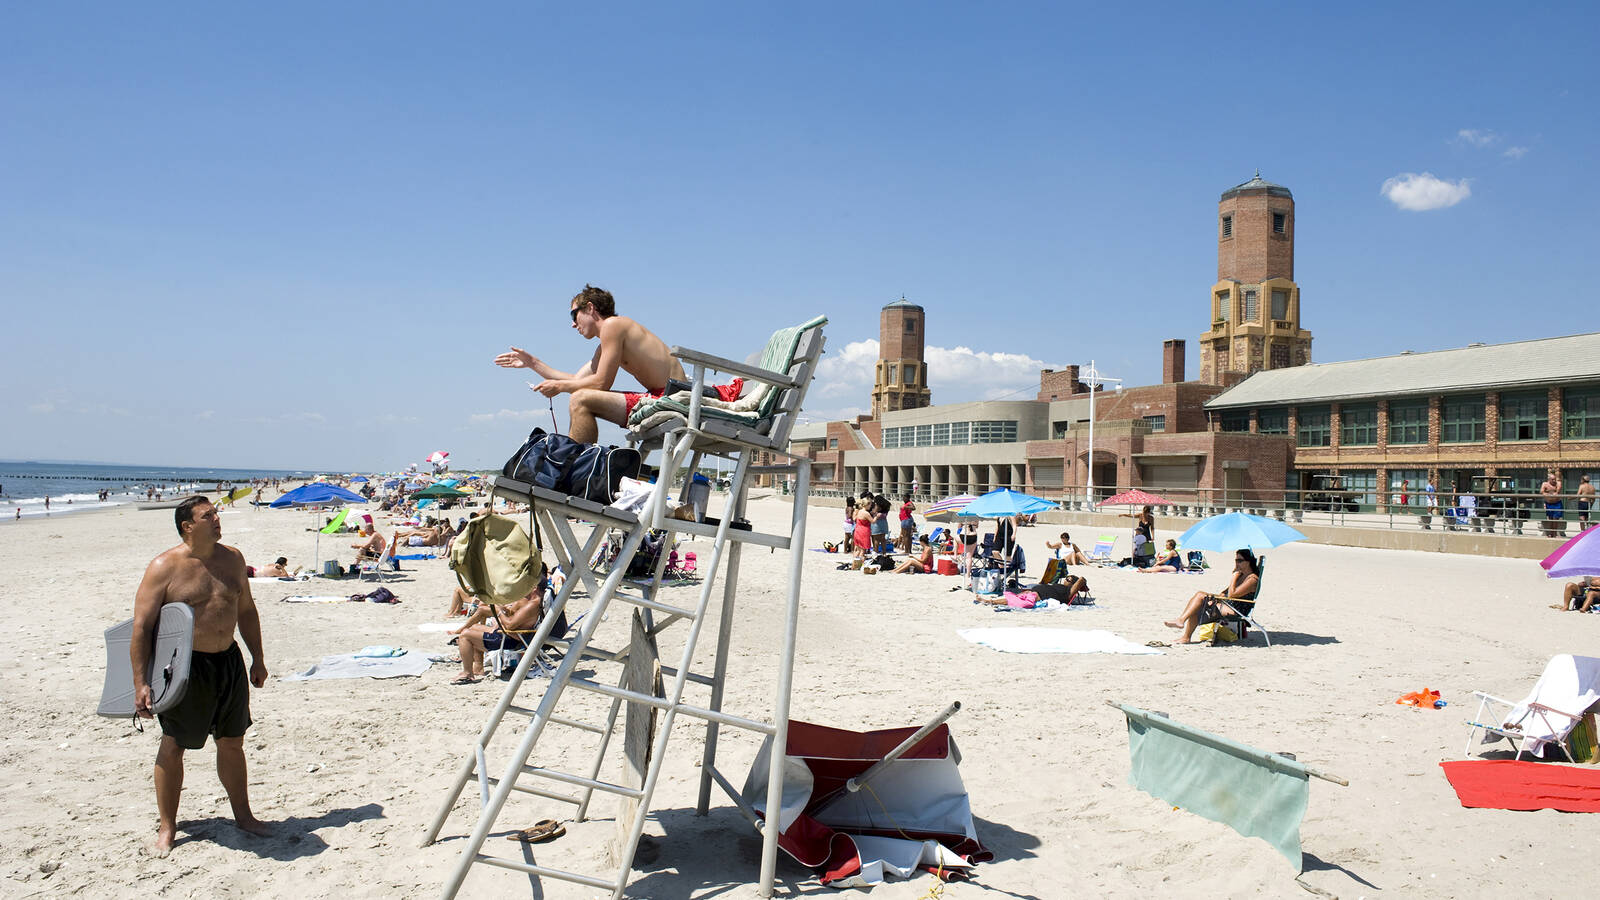 <p>In the summer, crowds flock to Jacob Riis Park, which boasts one of the biggest parking lots in New York City. </p>